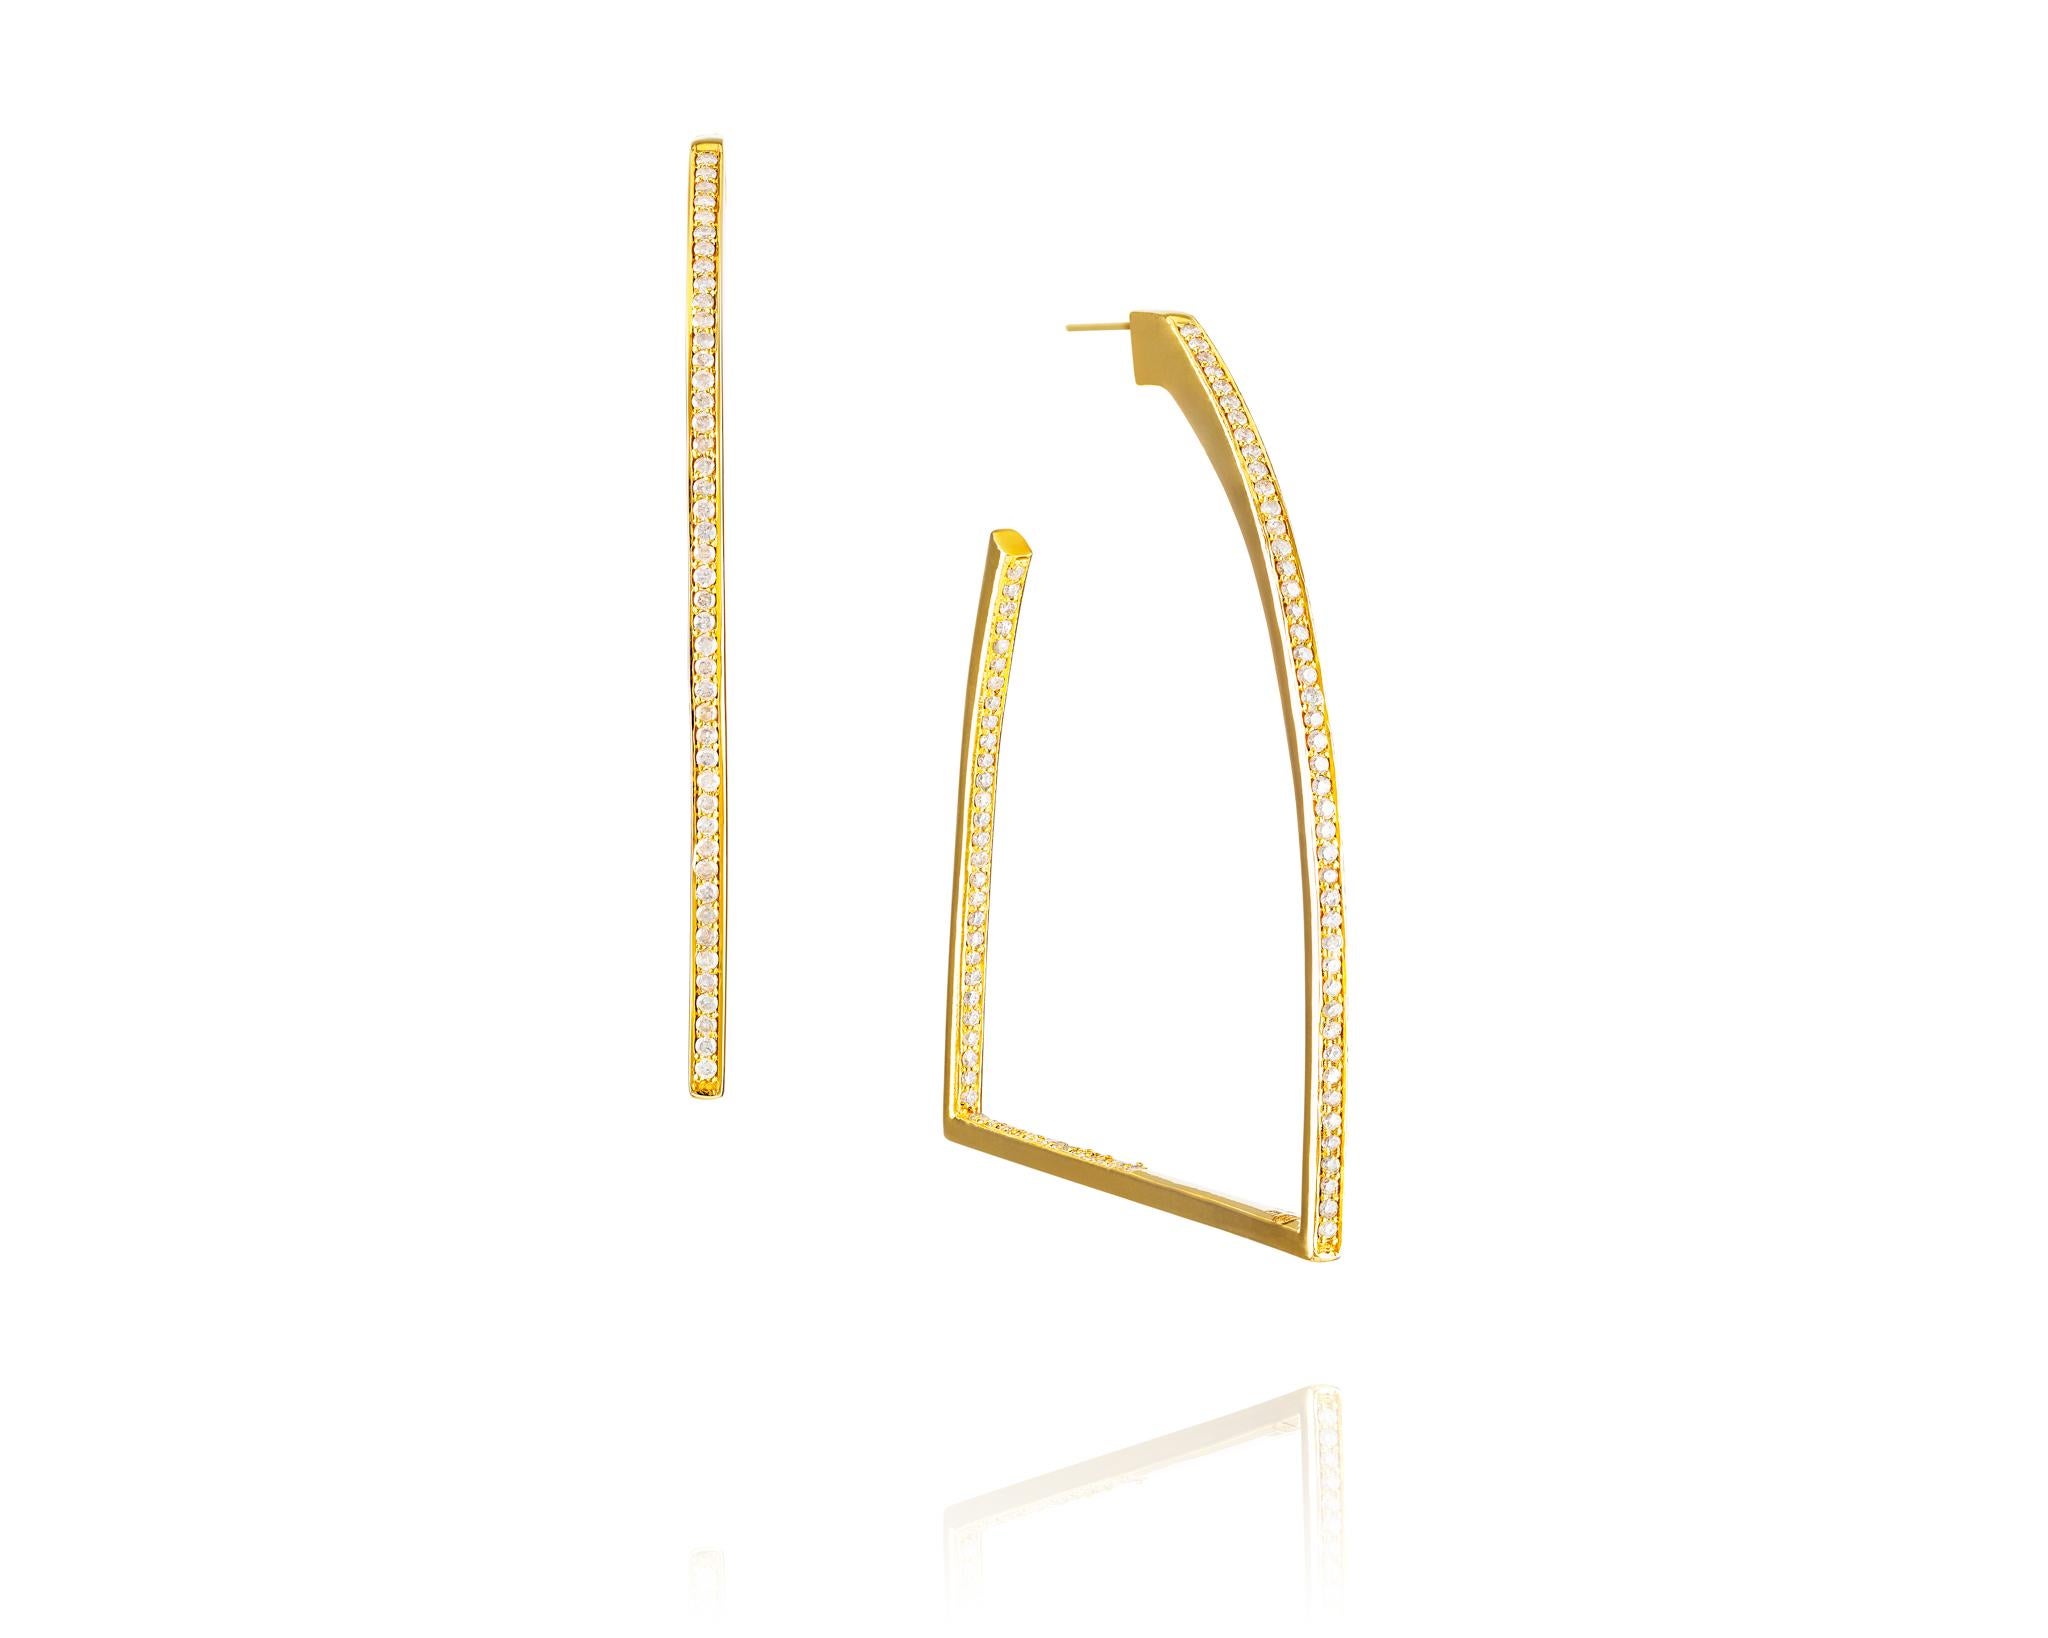 Part of the Vincent Peach Equestrian Collection, the Stirrup Hoop Earrings have 1.86ct of Diamonds mounted in Sterling Silver. 2